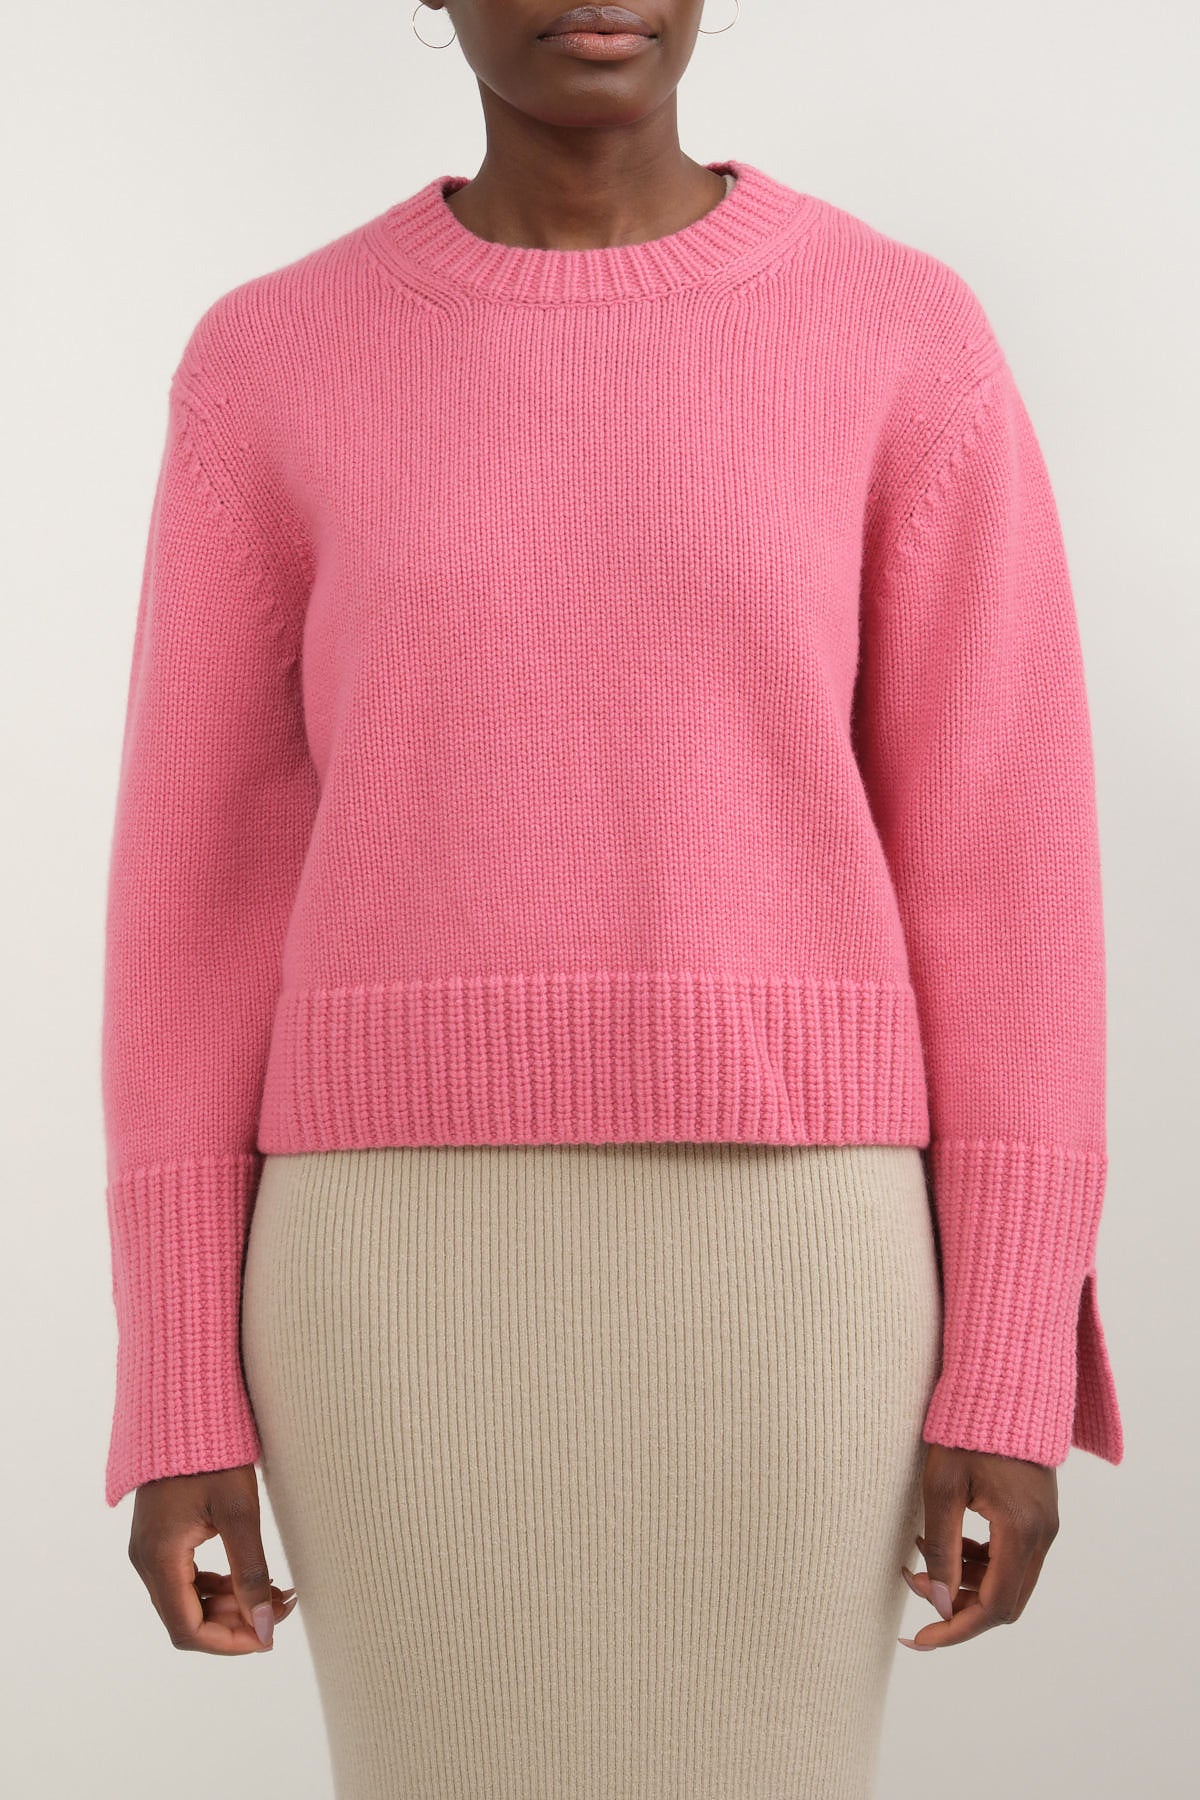 pink cashmere sweater allude